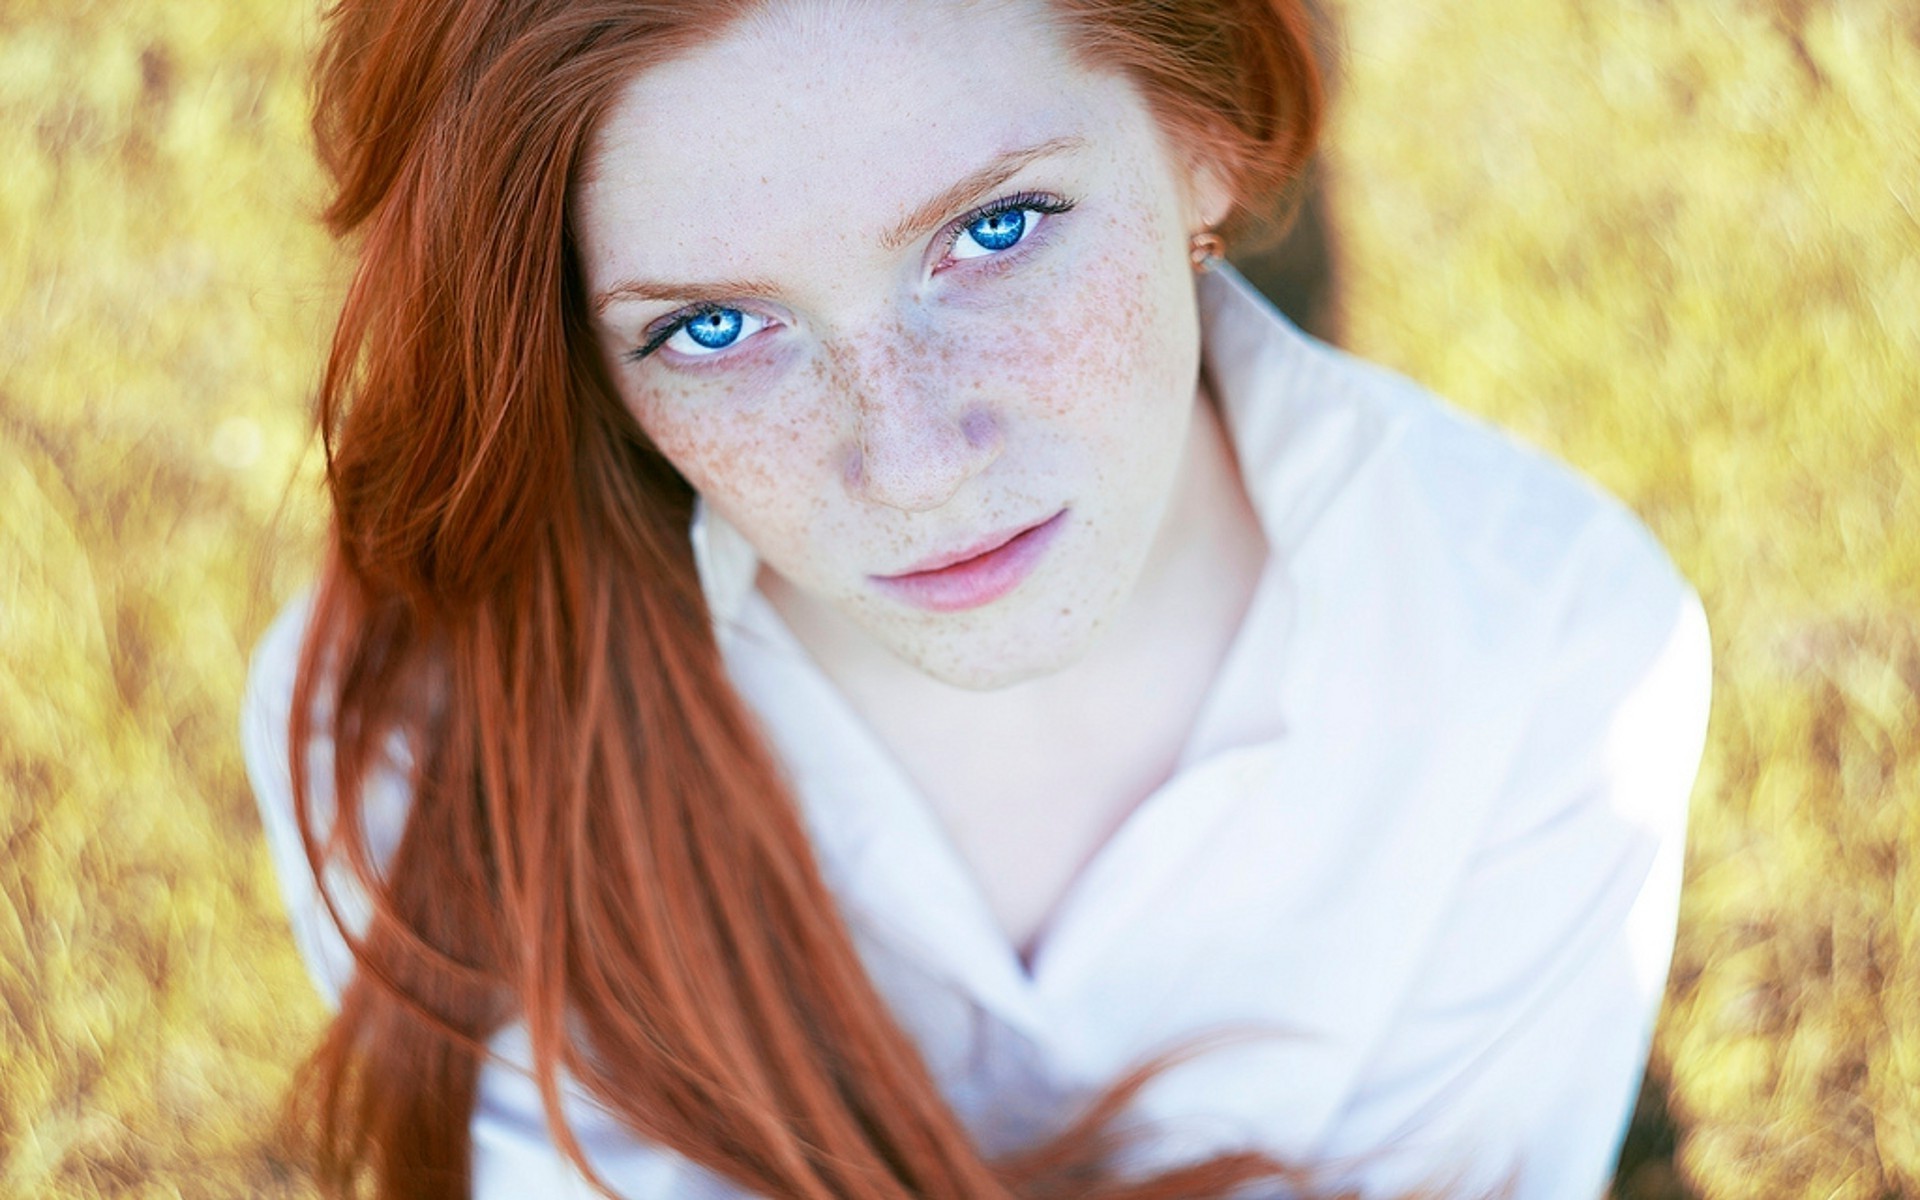 3. "The Beauty of Auburn Hair and Freckles on Blue Eyes: A Collection of Drawings" - wide 5